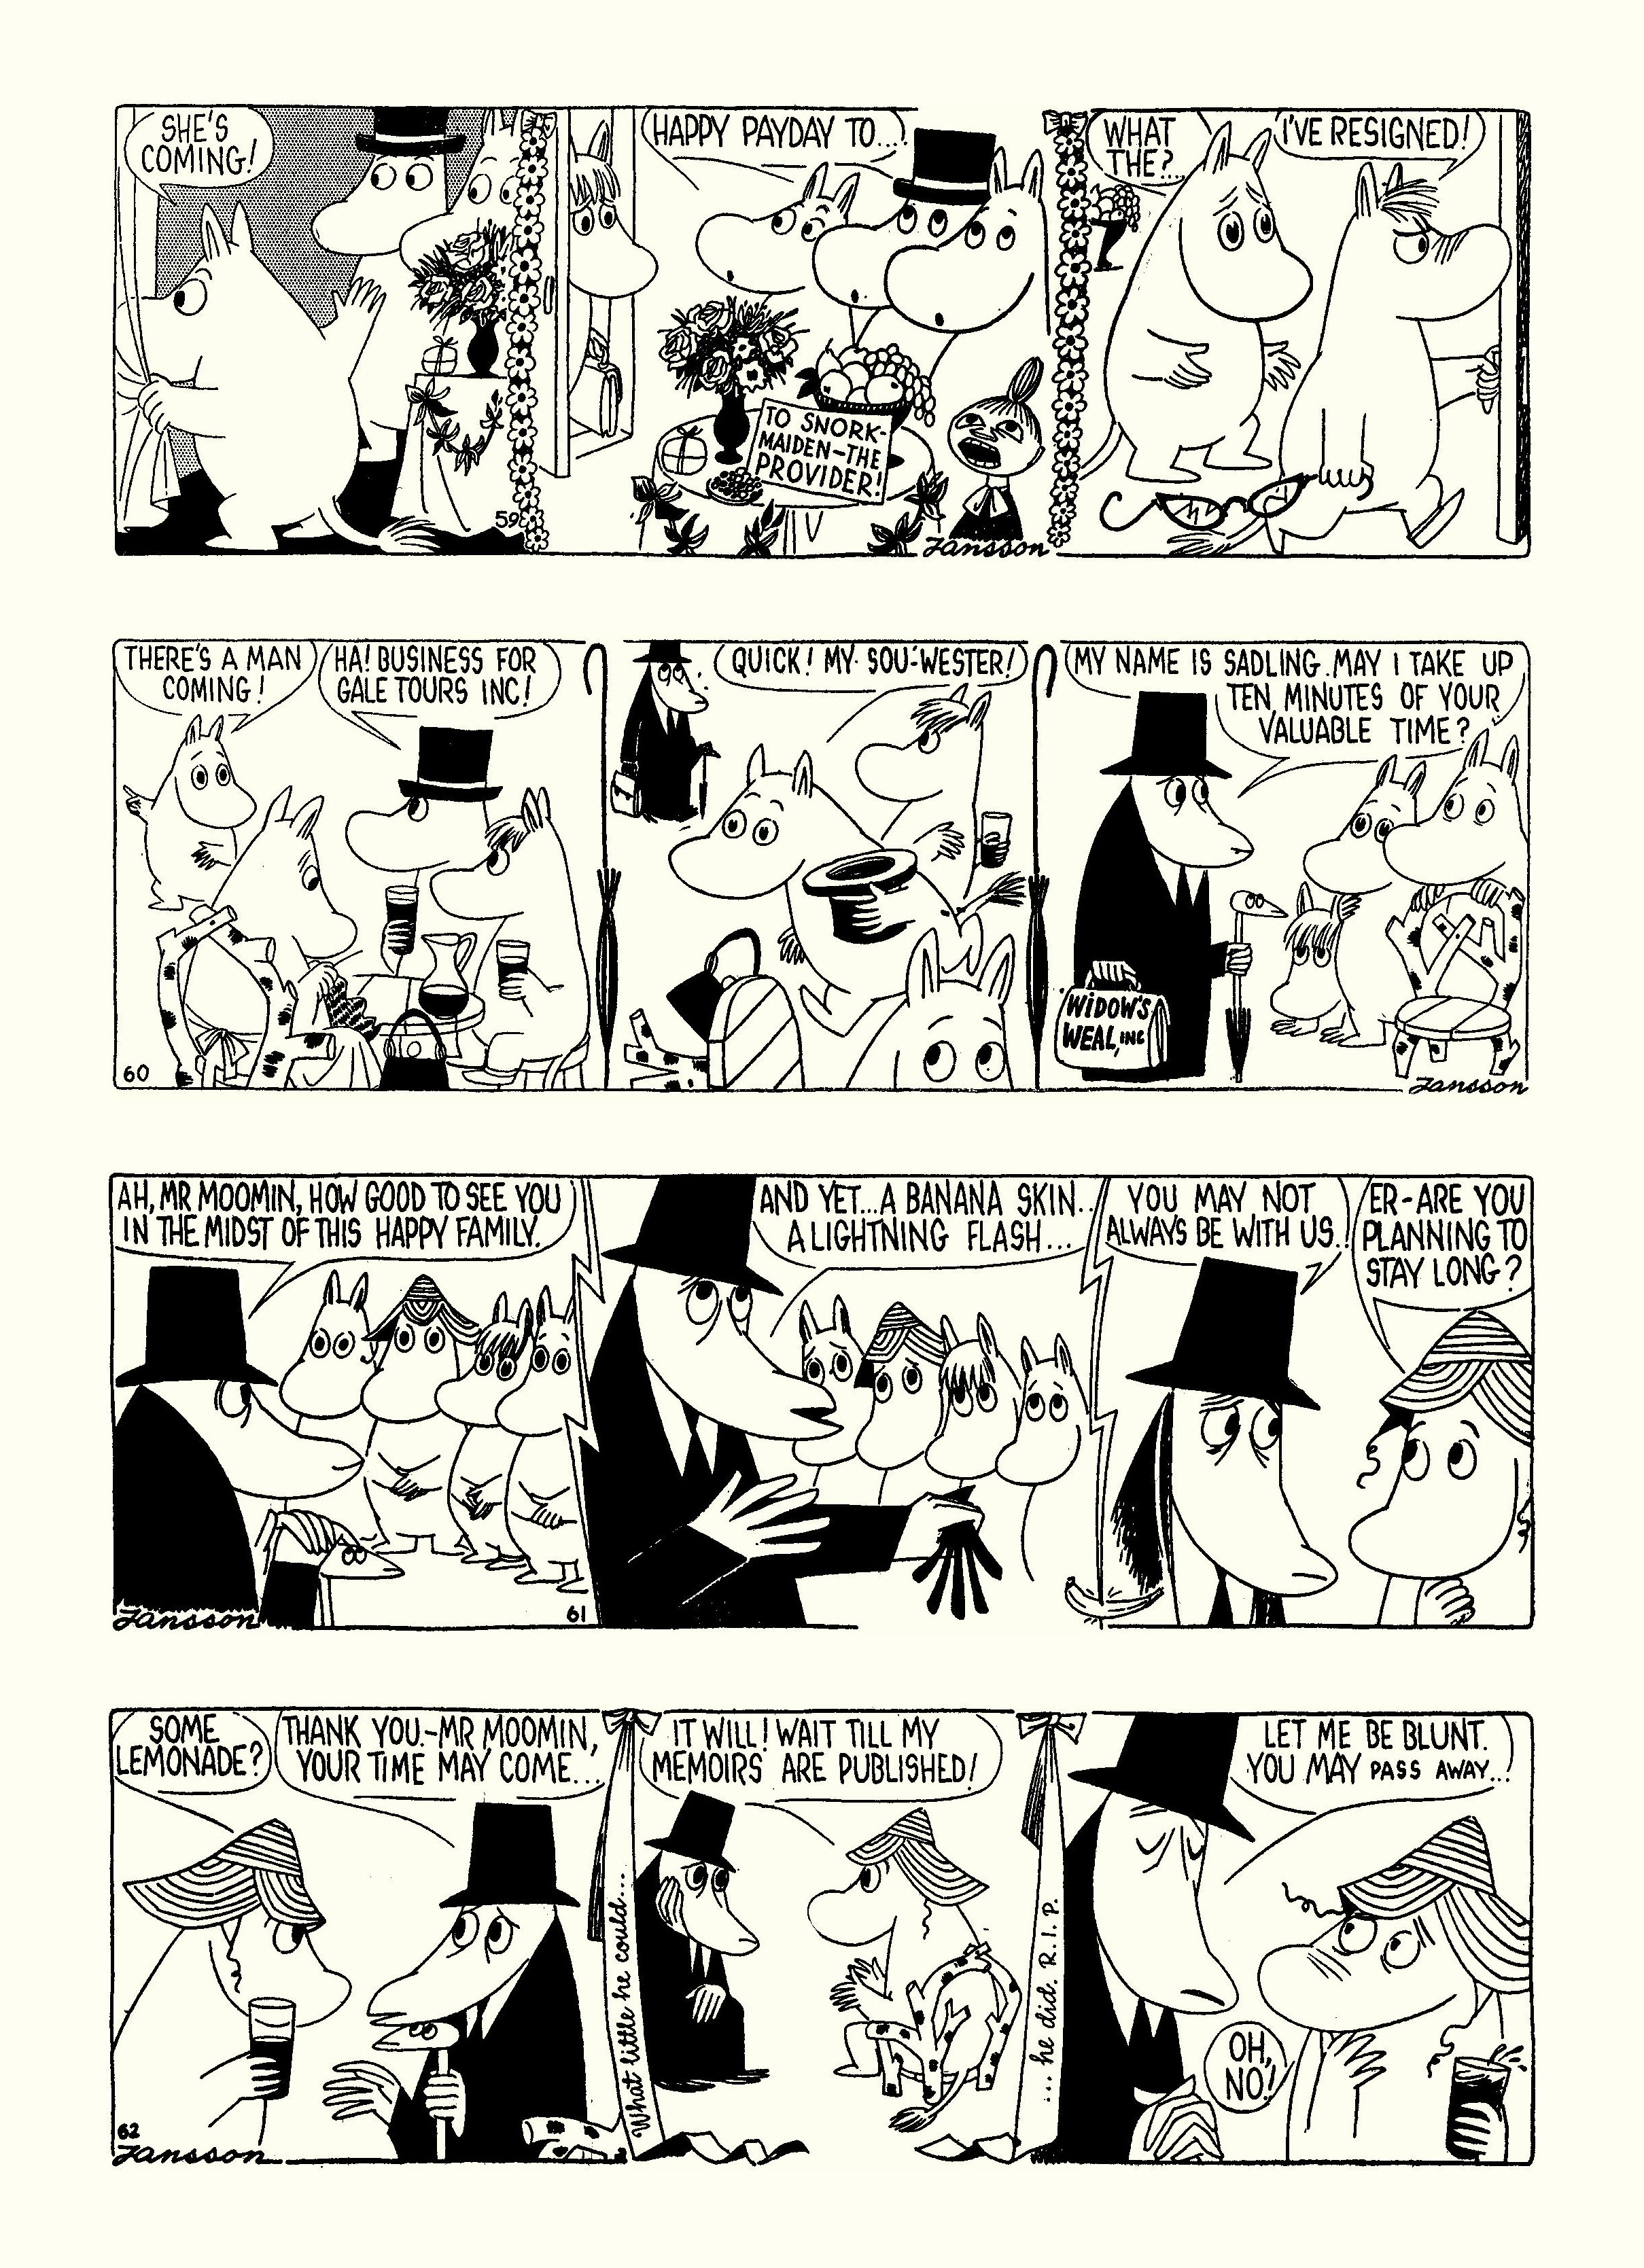 Read online Moomin: The Complete Tove Jansson Comic Strip comic -  Issue # TPB 4 - 52